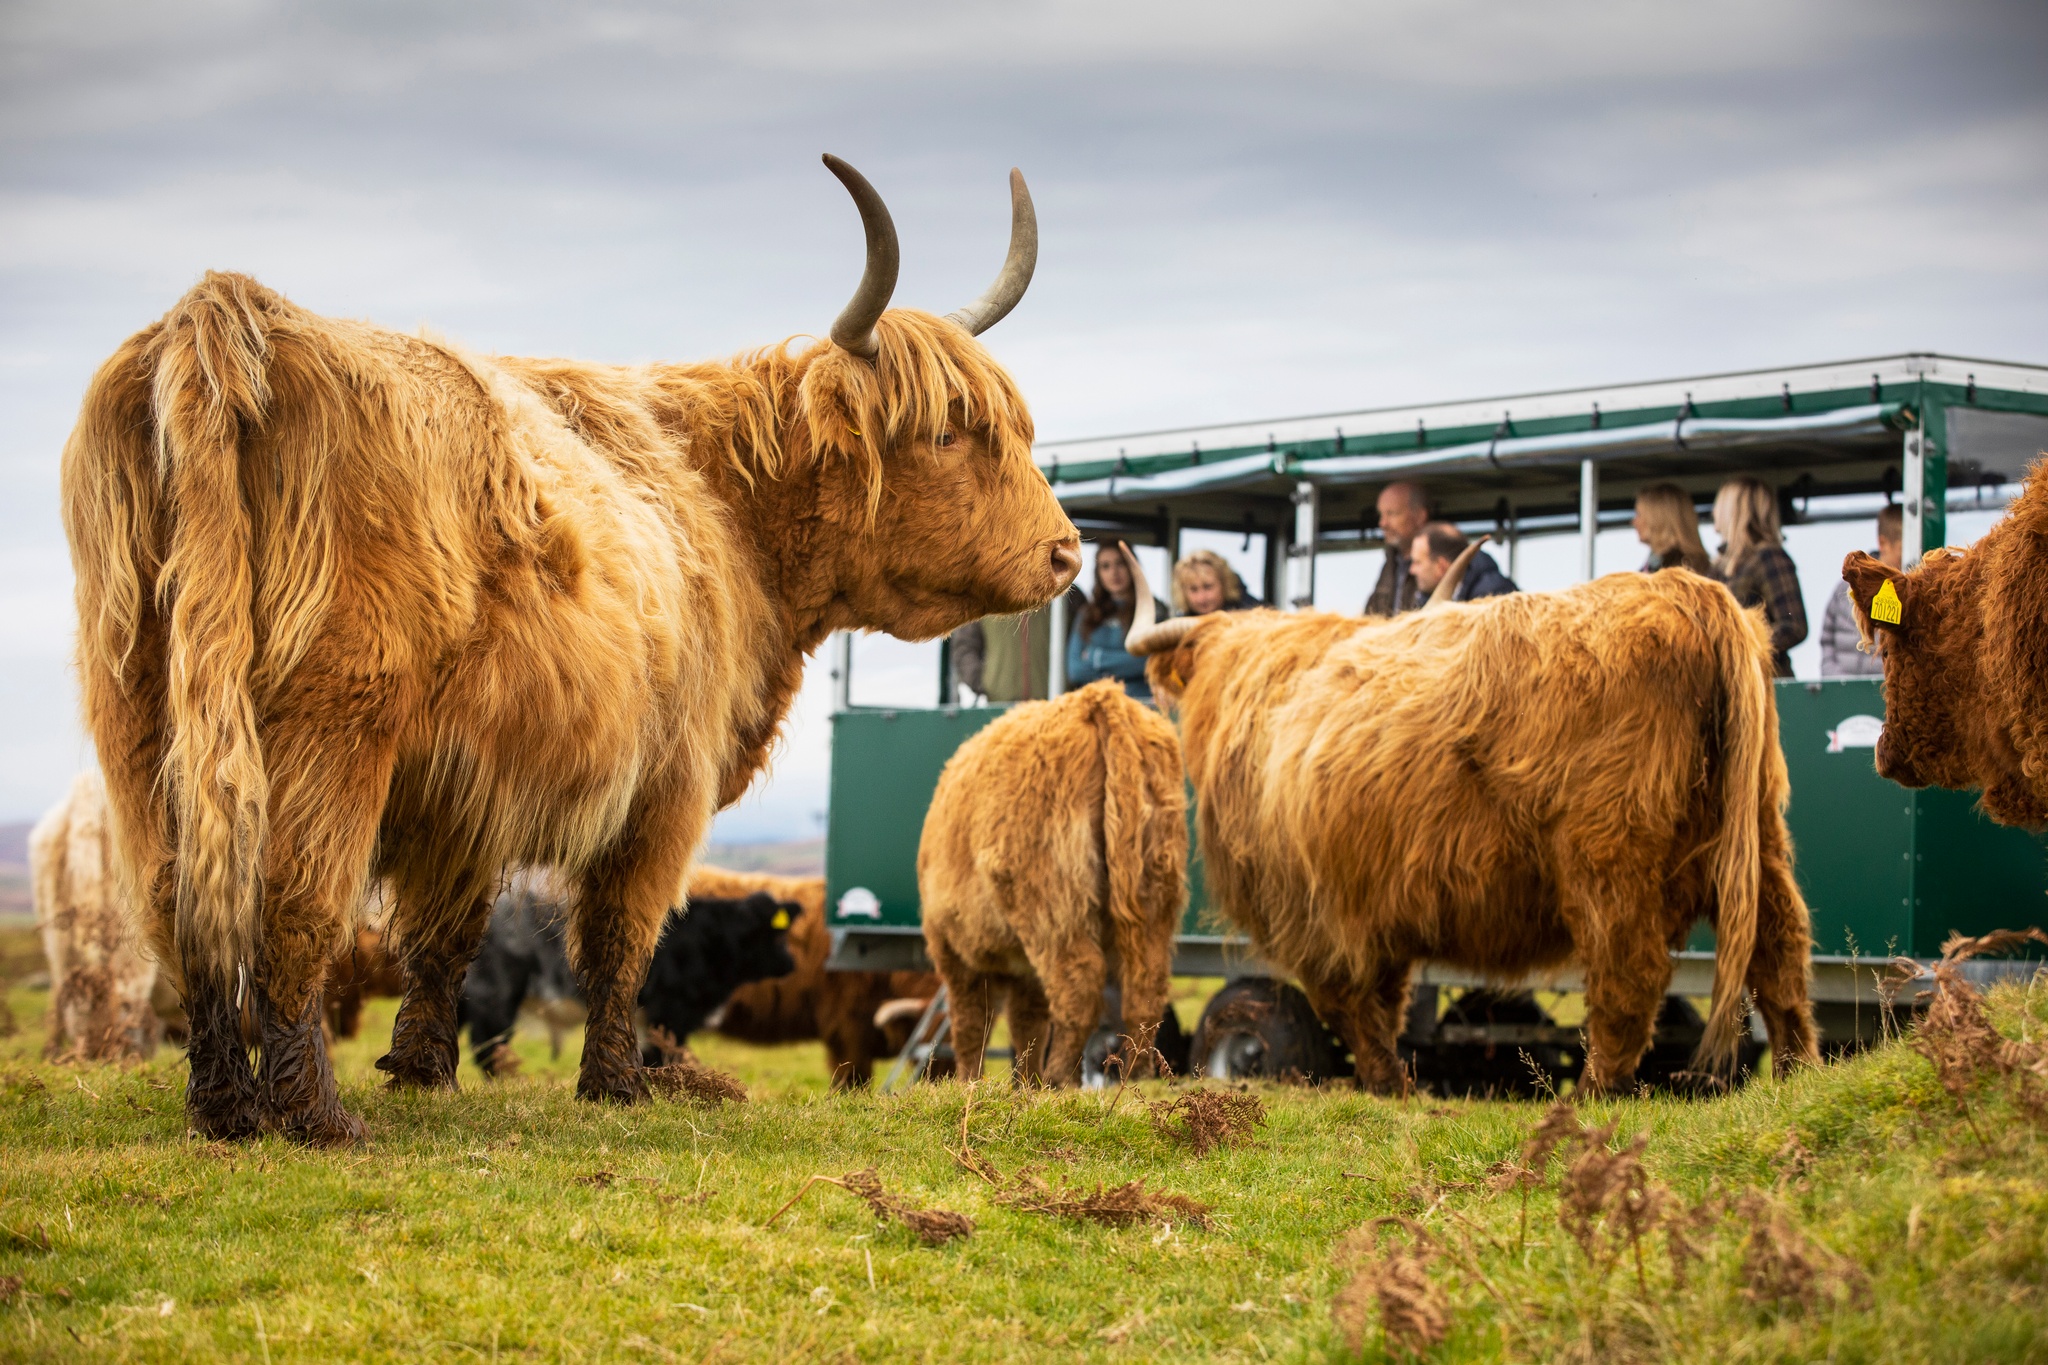 Kitchen Coos and ewes credit VisitScotland Kenny Lam